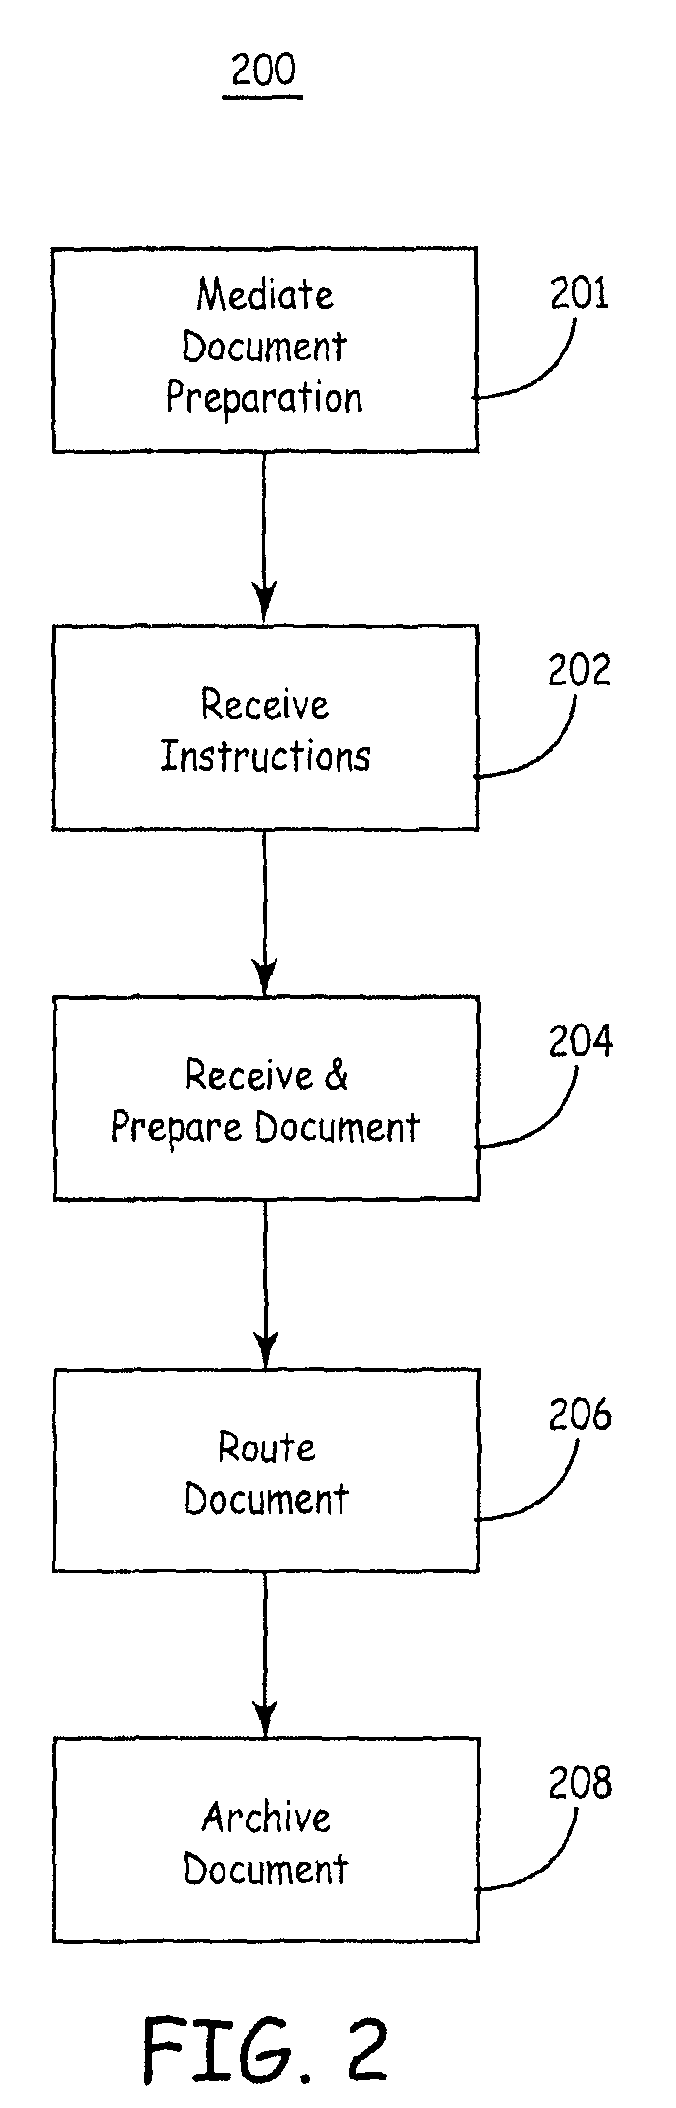 Automatic document exchange with archiving capability